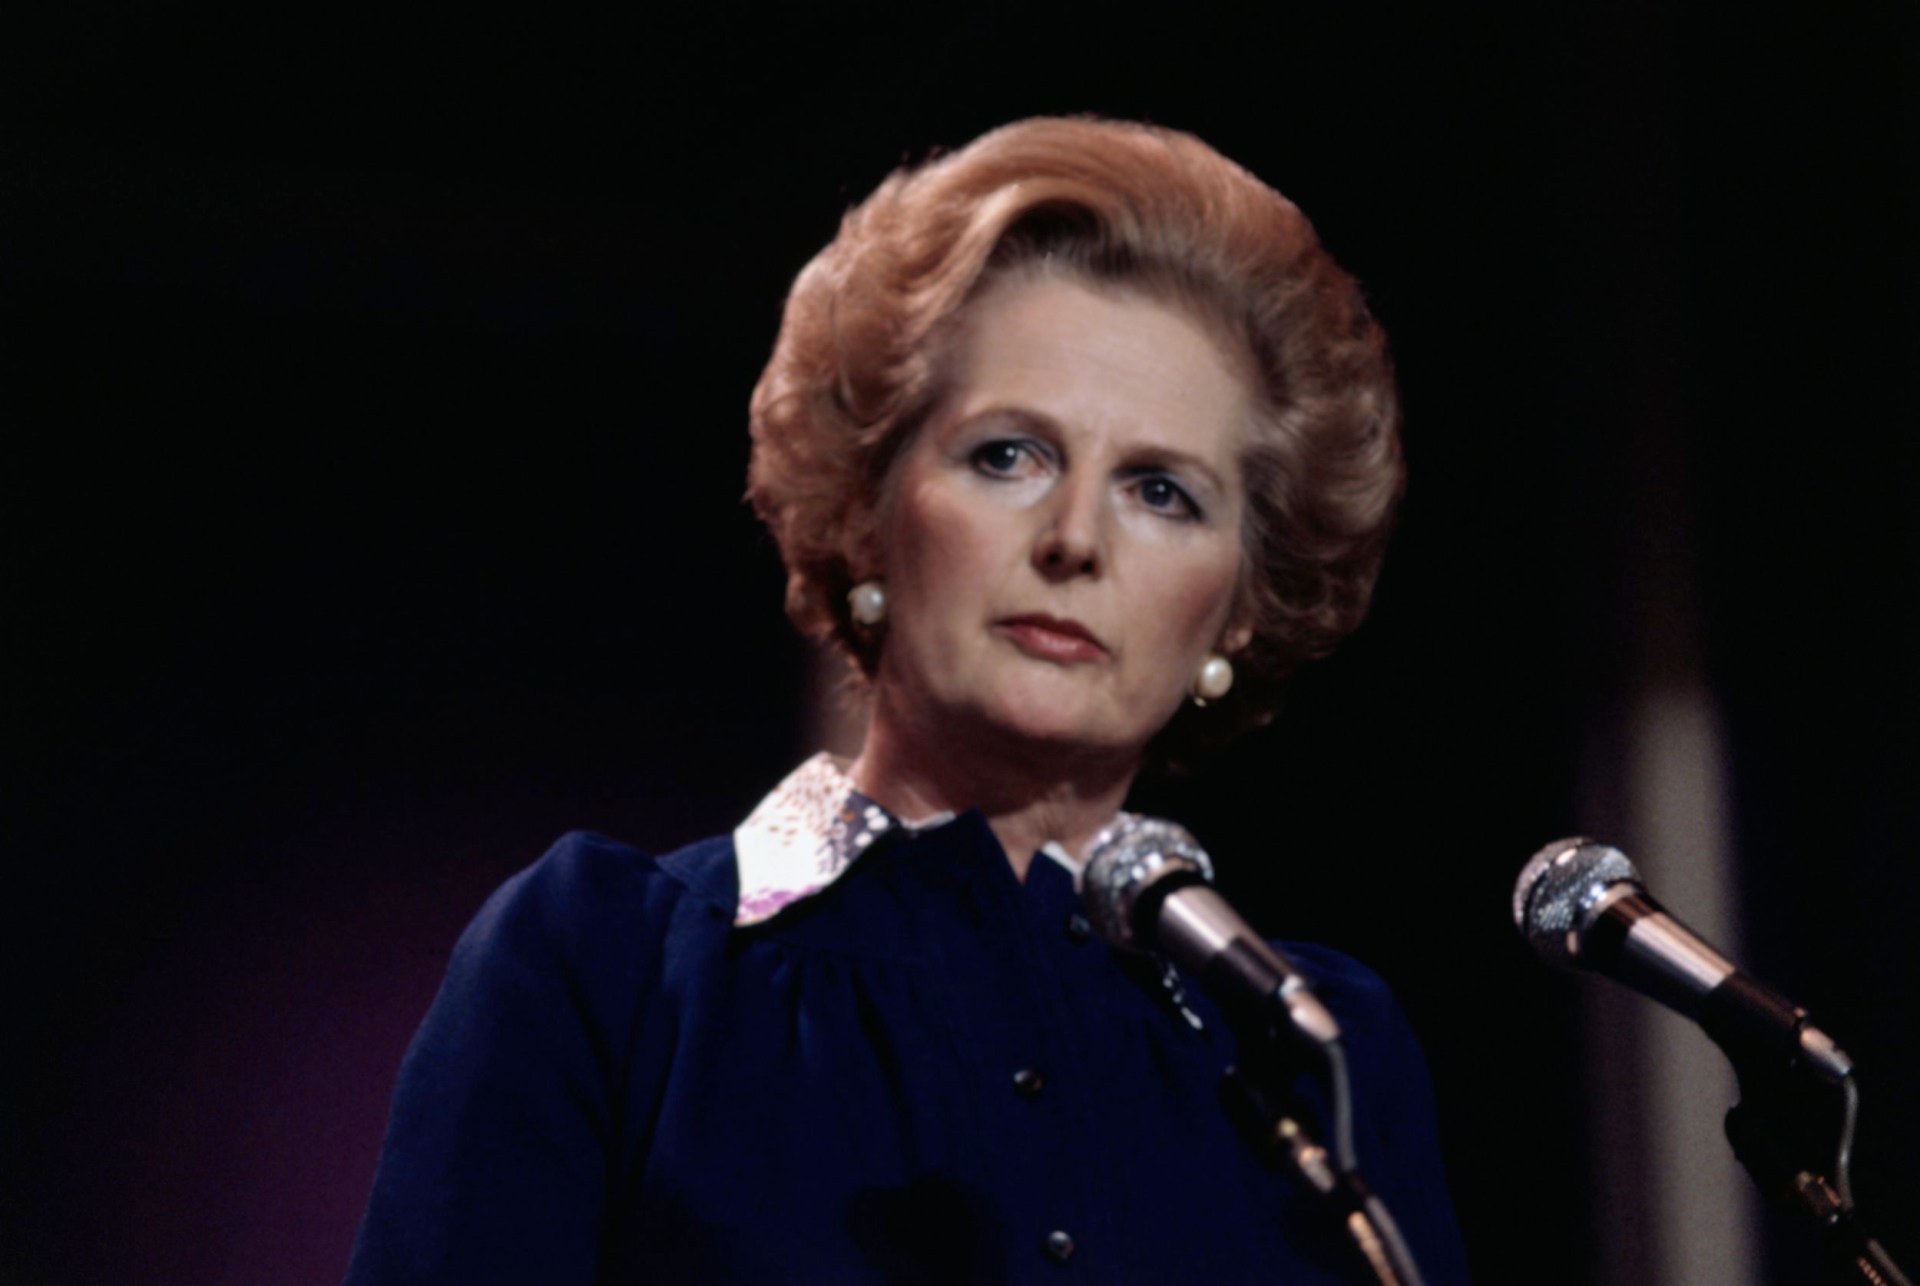 women still waiting for political equality 45 years after margaret thatcher made history